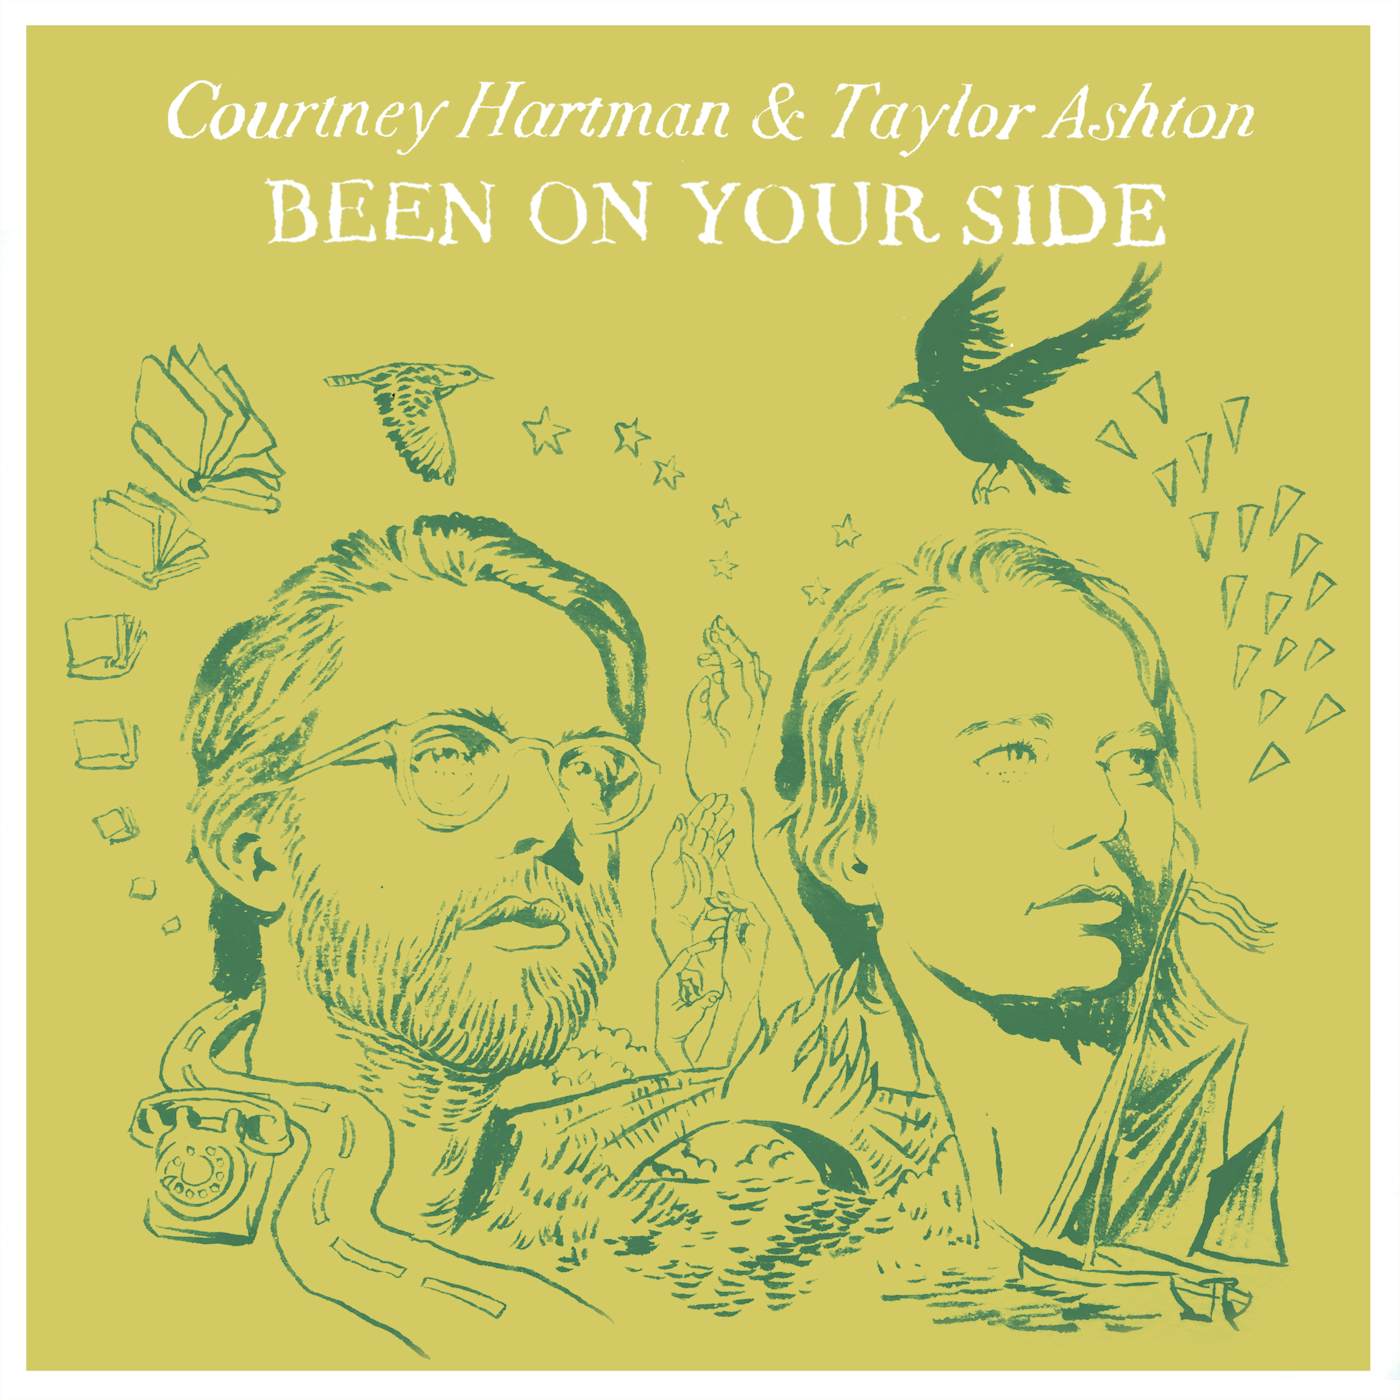 Courtney Hartman & Taylor Ashton Been on Your Side Vinyl Record